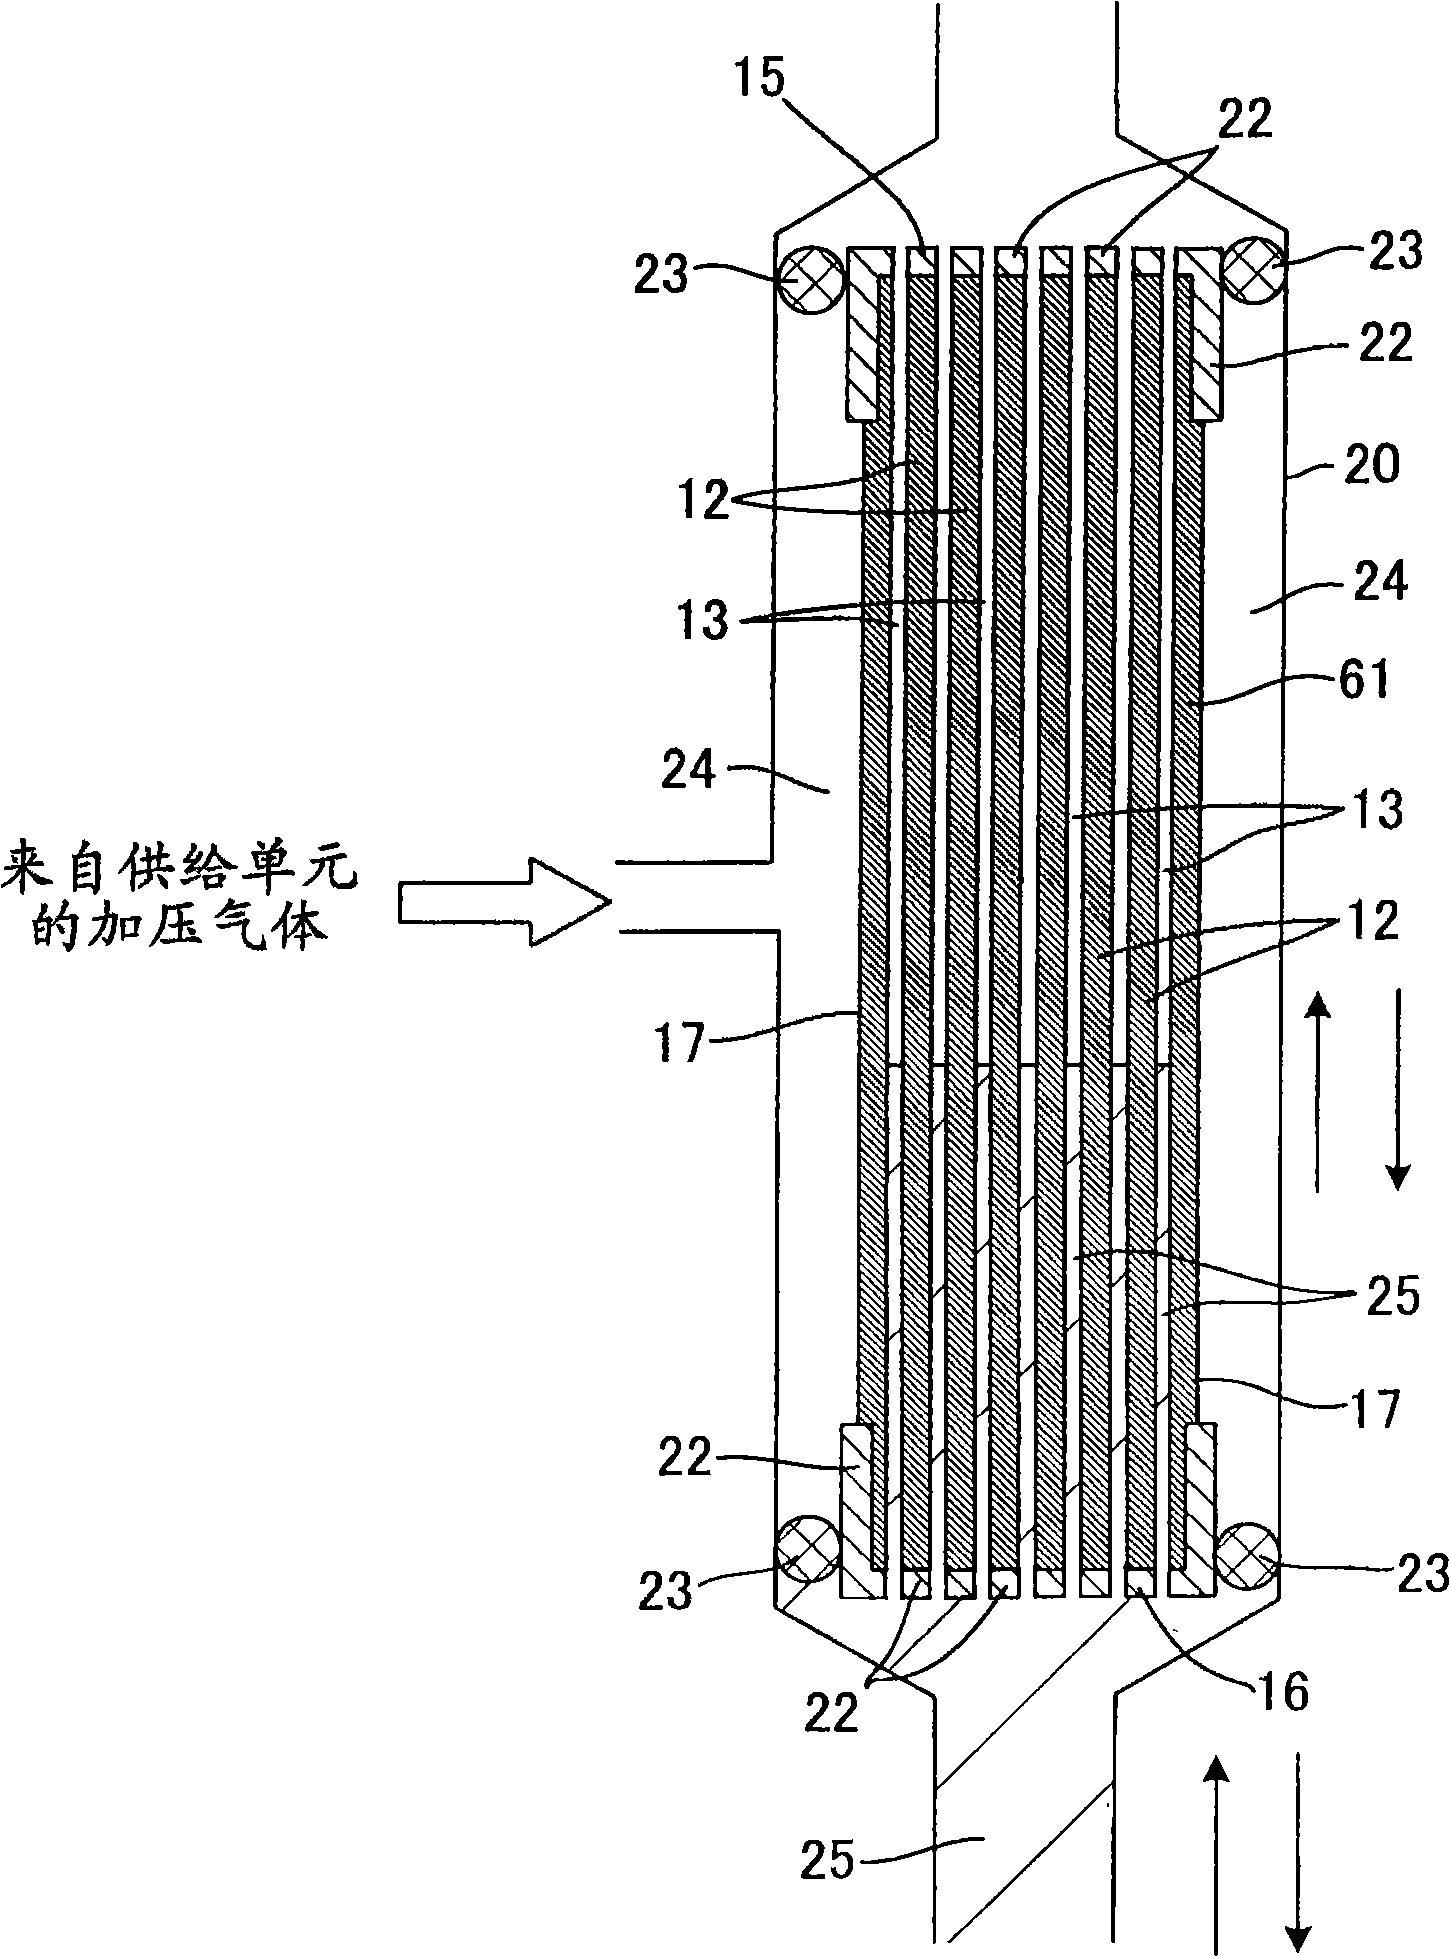 Separation membrane-porous material composite and method for manufacturing the same